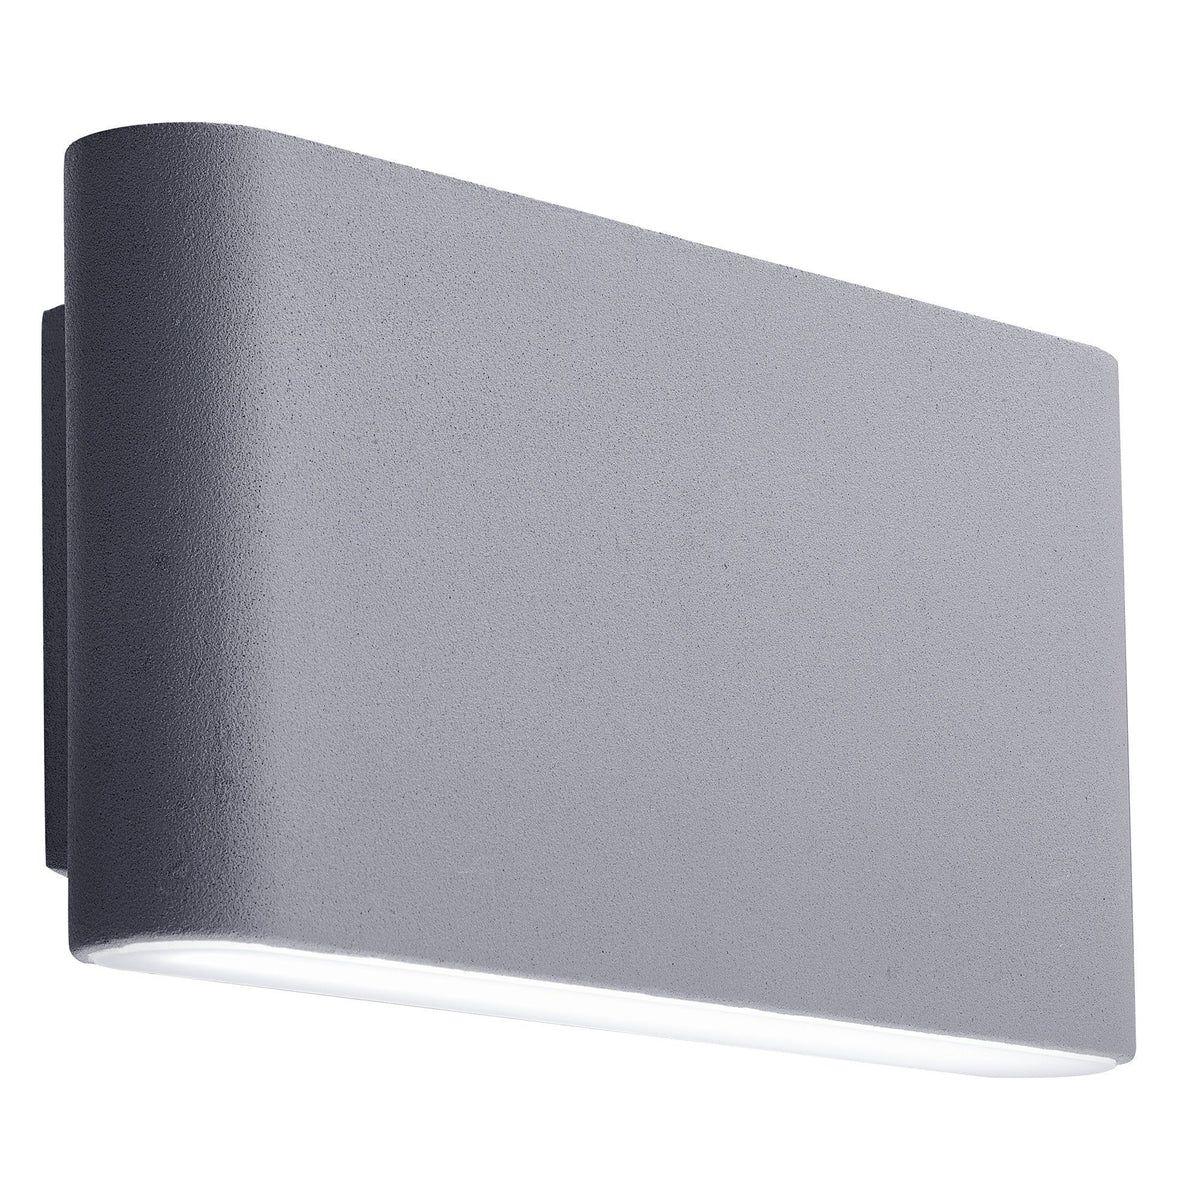 GREY ALUMINIUM LED IP44 OUTDOOR WALL LIGHT FROSTED POLYCARBONATE SHADE - Cusack Lighting